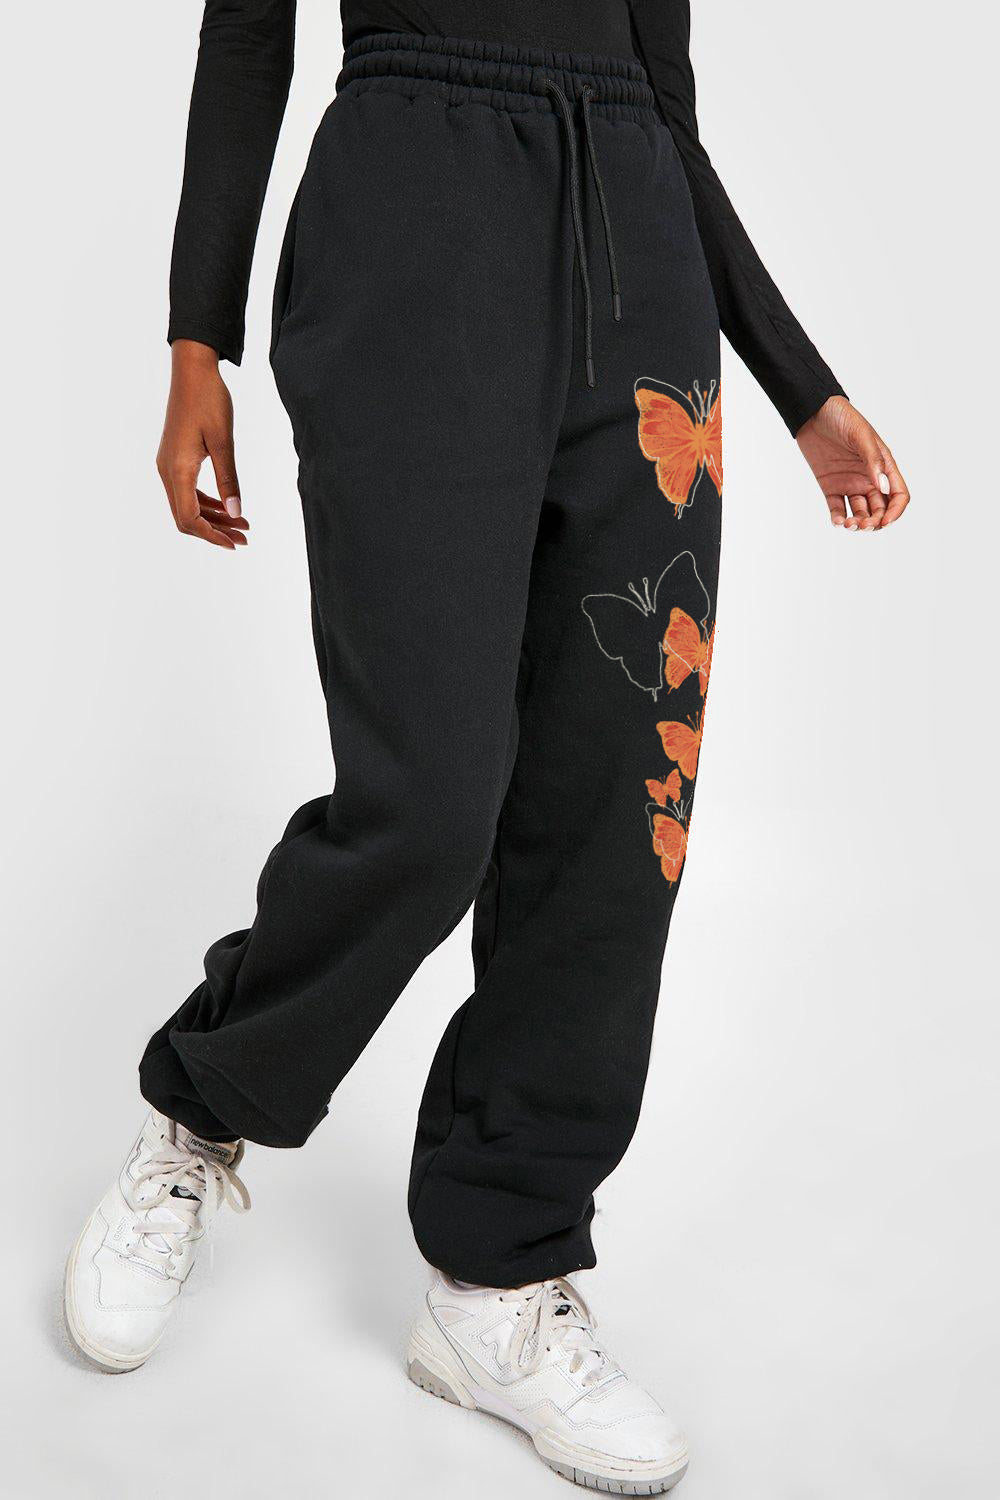 Lavender Simply Love Full Size Butterfly Graphic Sweatpants